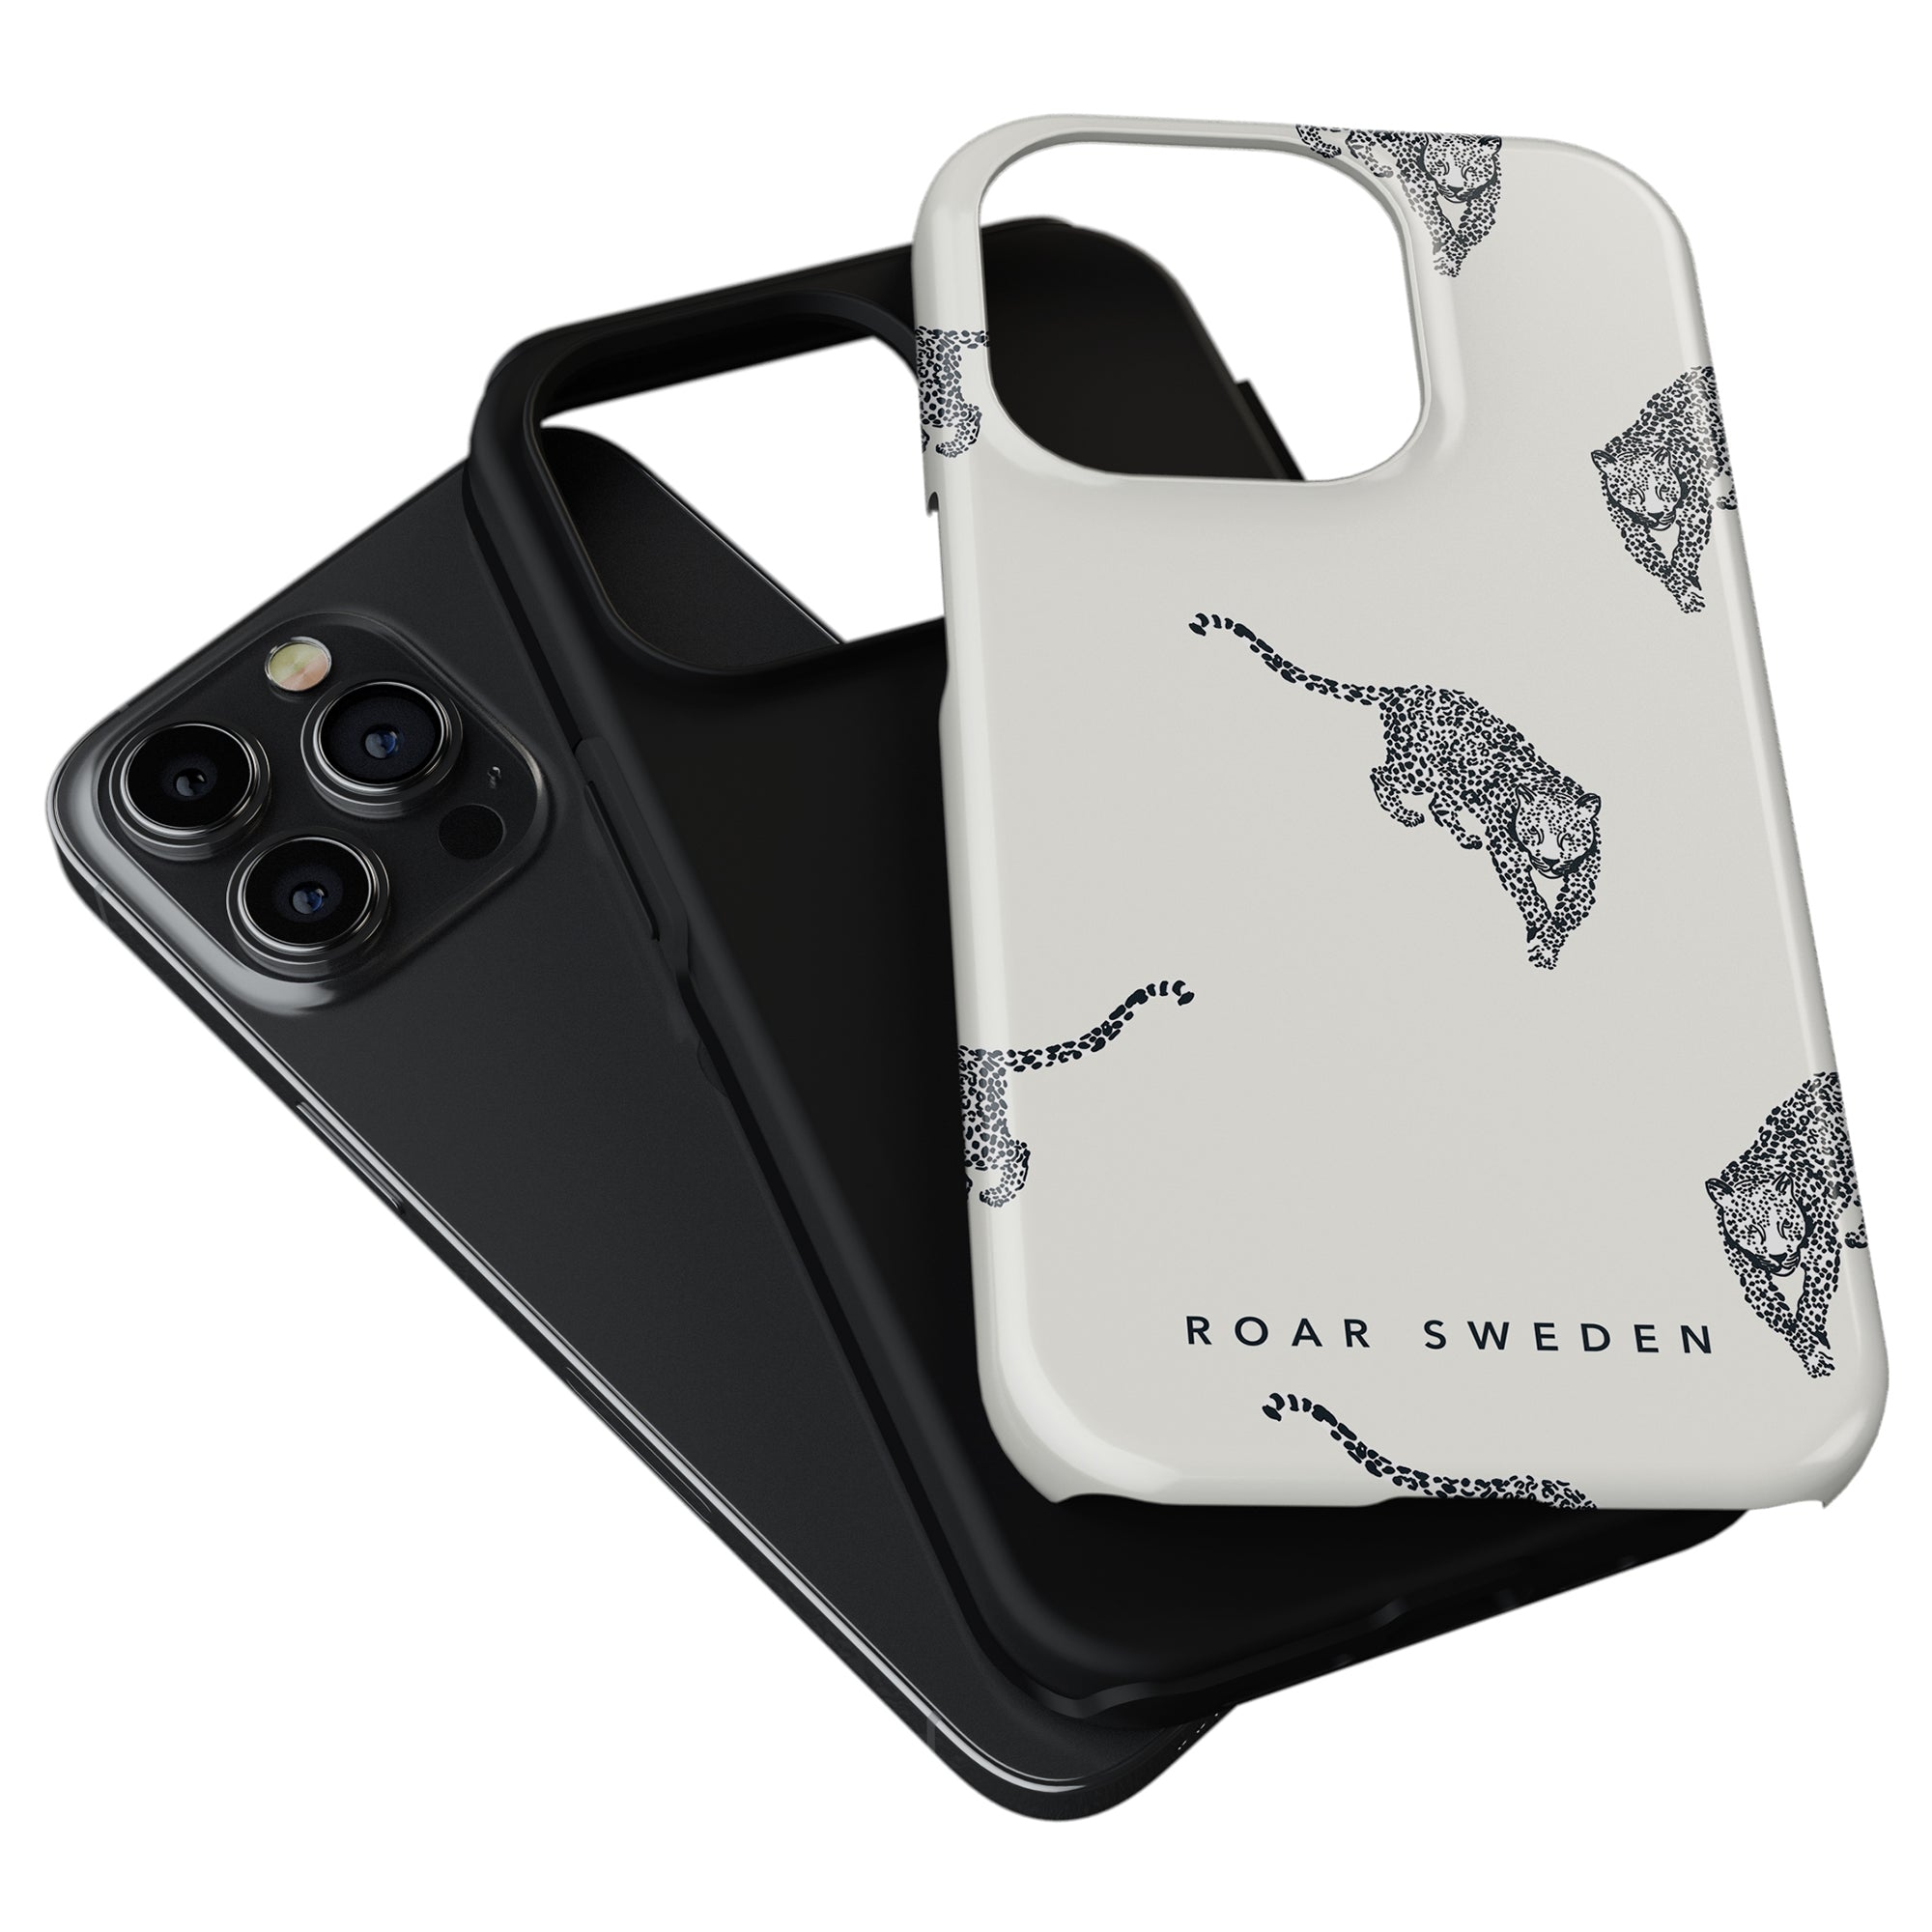 An elegans Kitty Deluxe - Tough Case with a tiger on it, showcasing innovation.